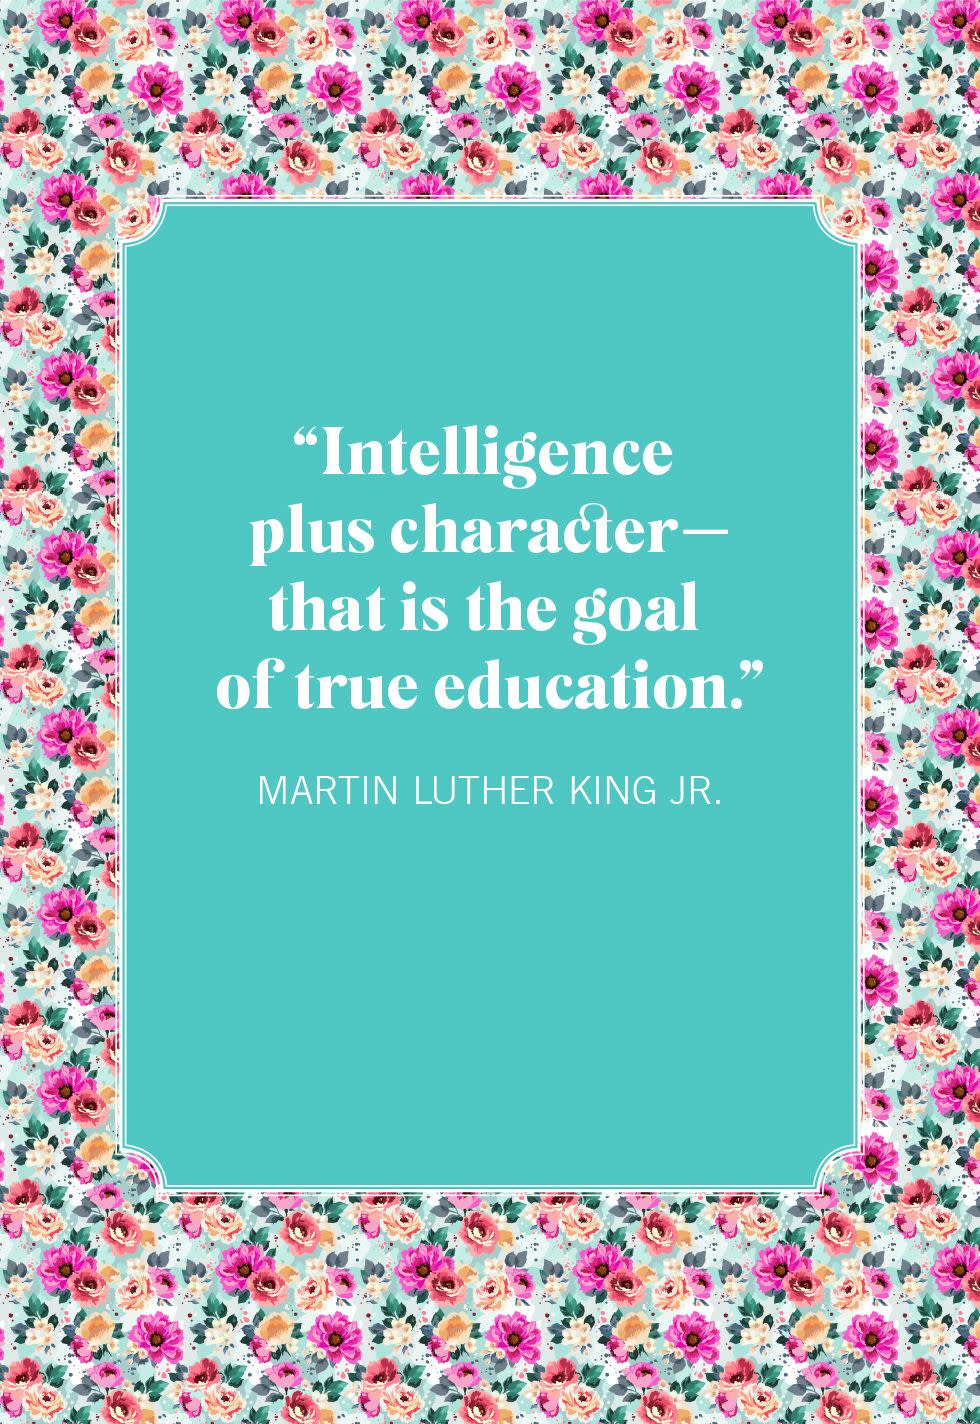 graduation quotes martin luther king jr